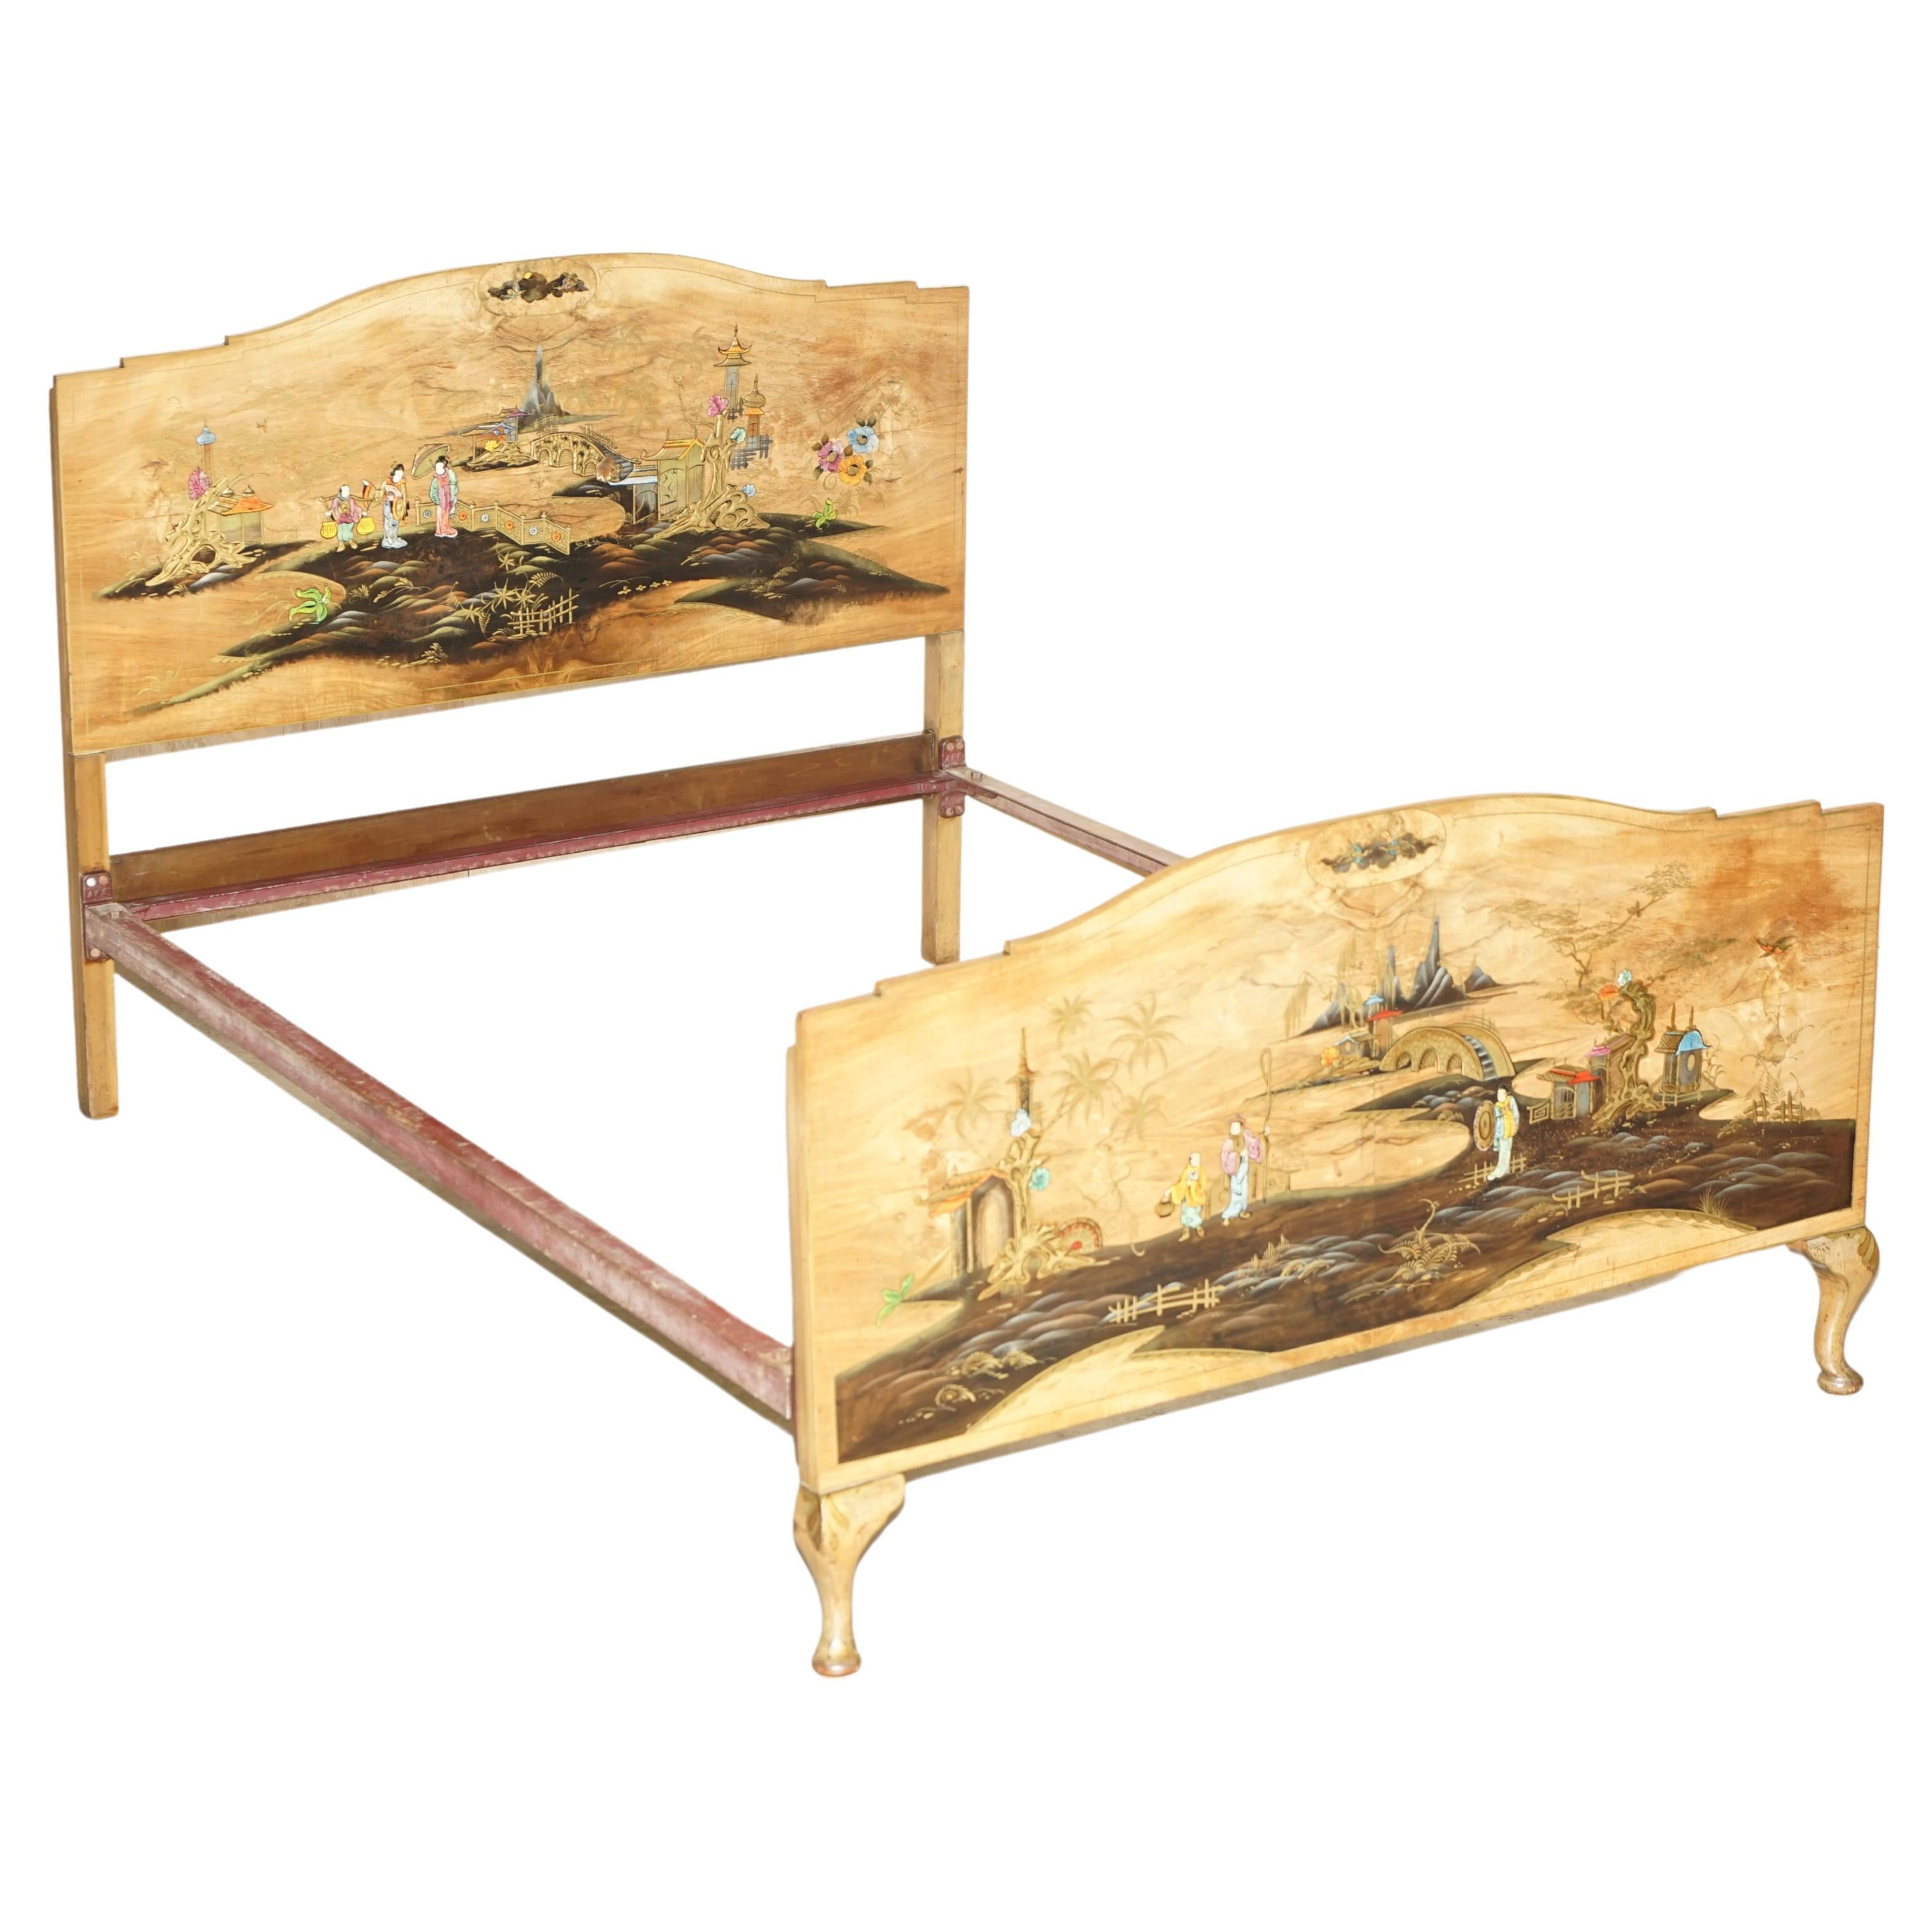 LOVELY DOUBLE SiZED CIRCA 1920 CHINESE CHINOISERIE BEDSTEAD FRAME PART SUITE For Sale